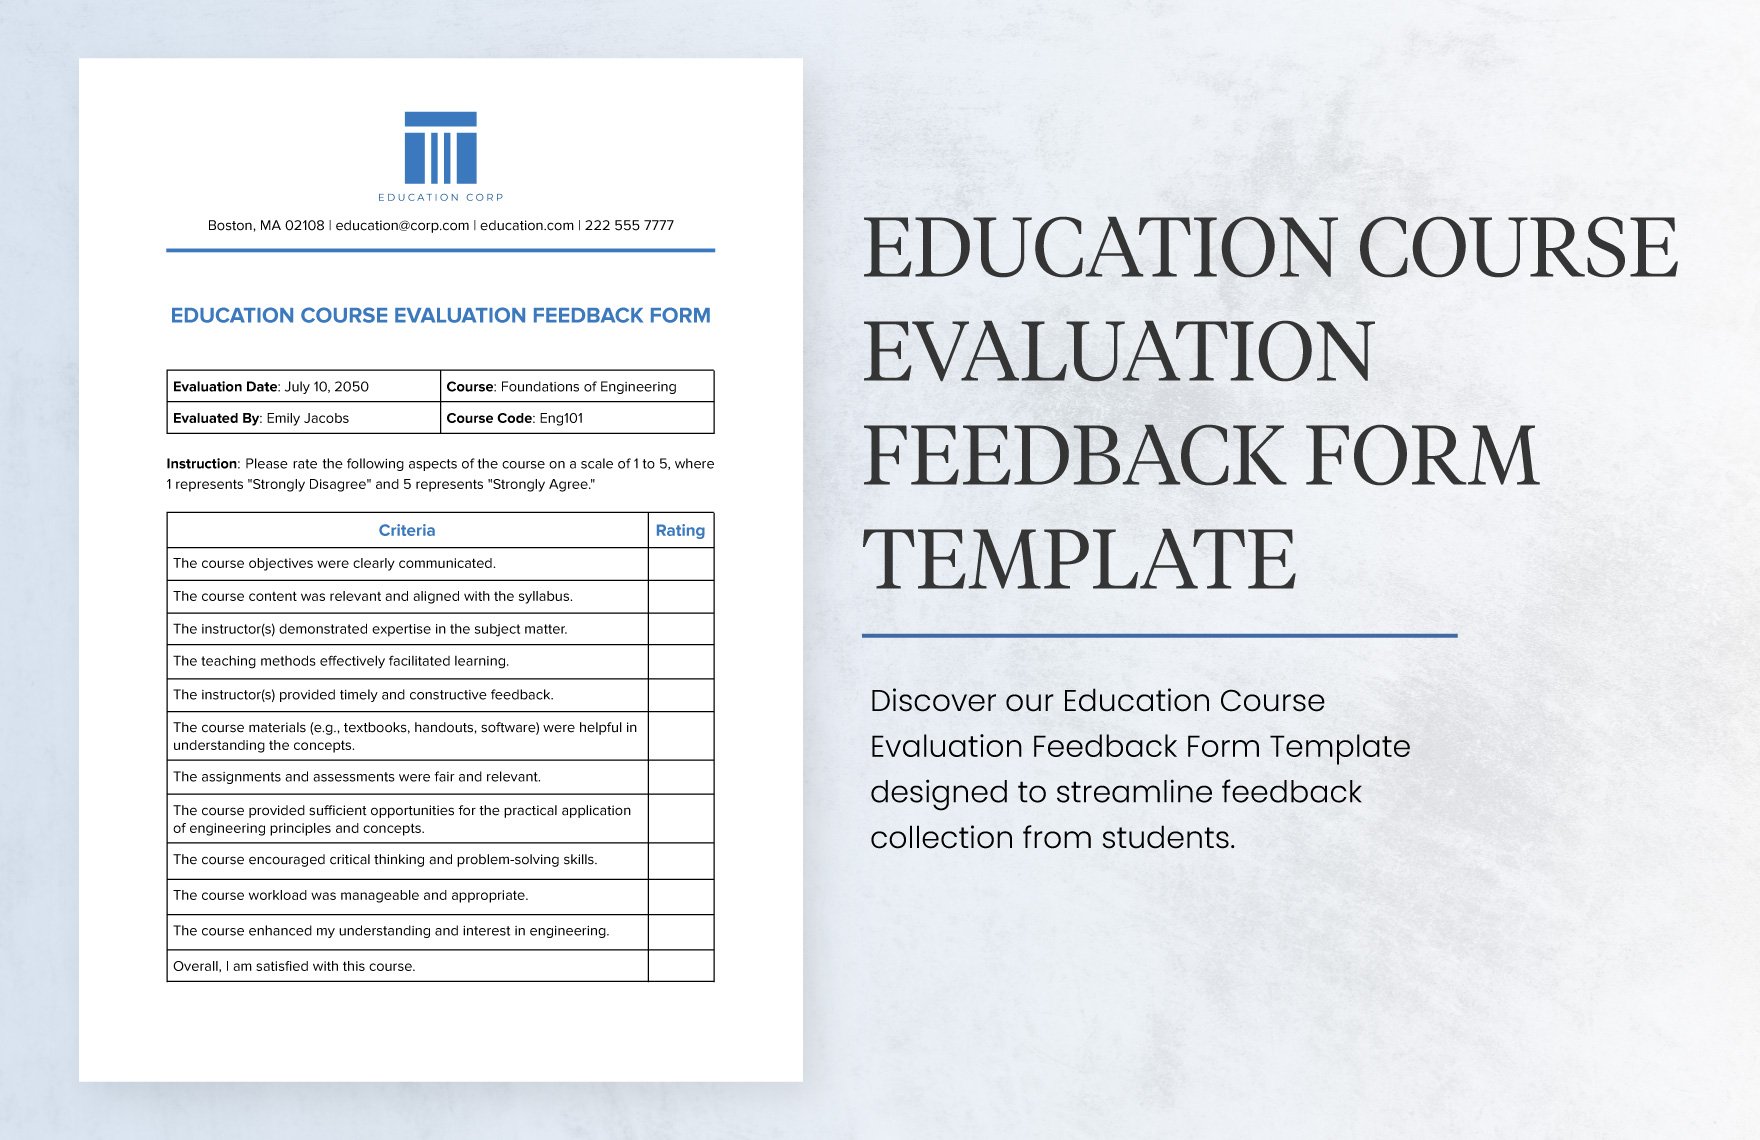 Education Course Evaluation Feedback Form Template